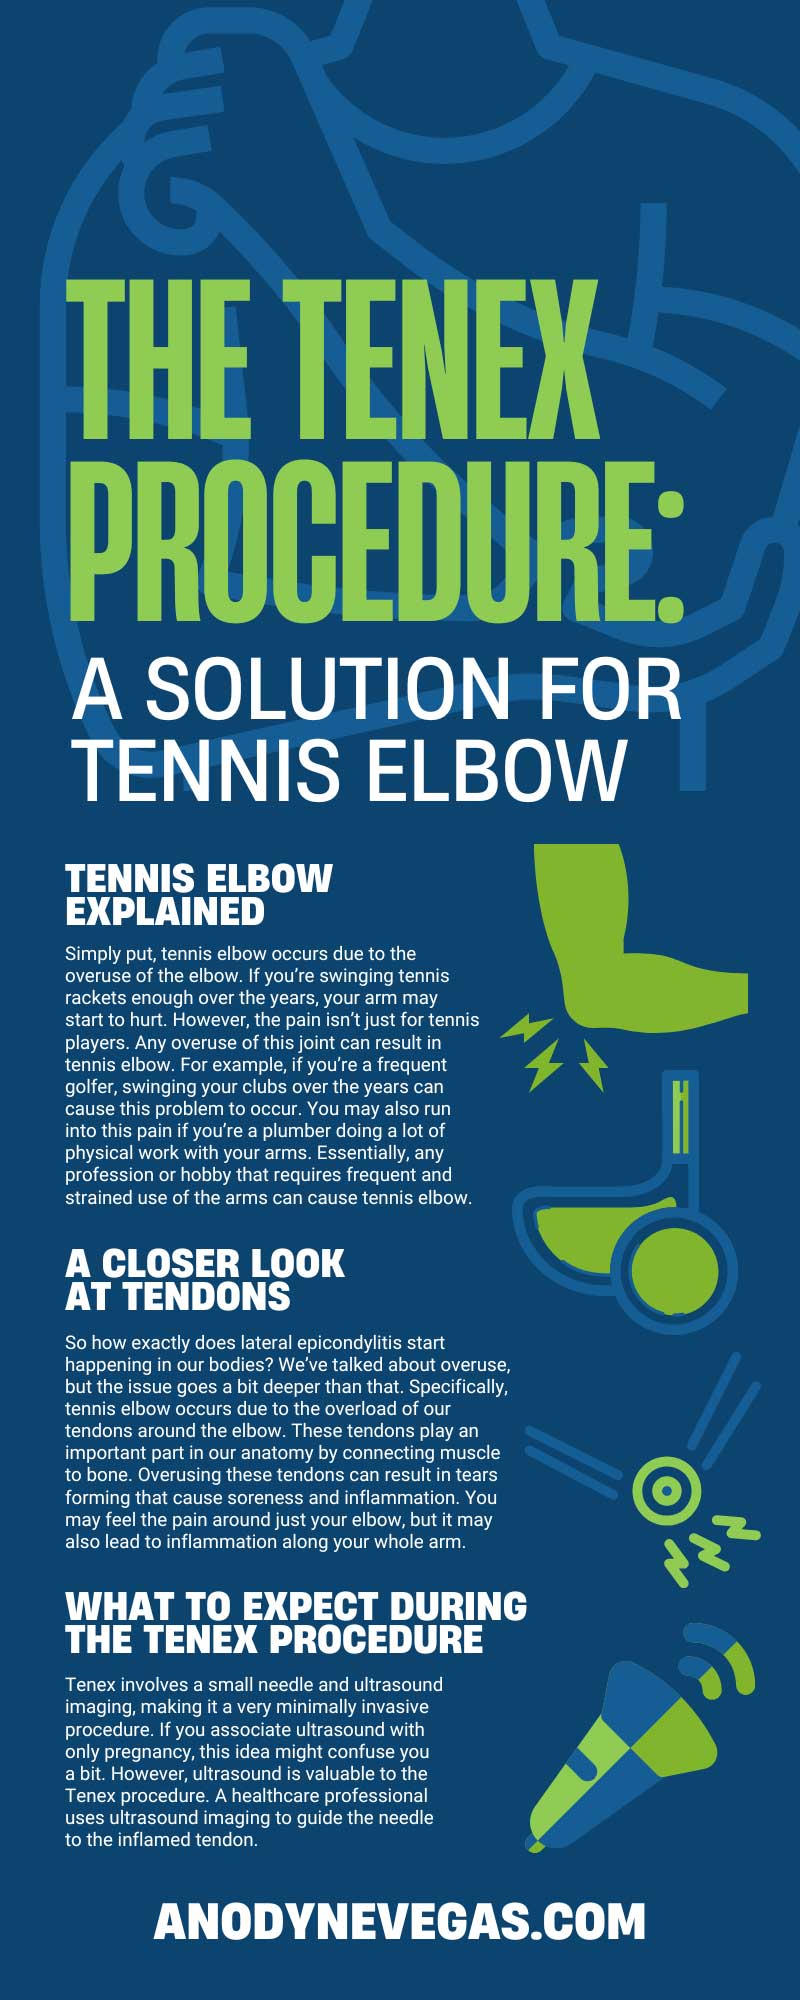 The Tenex Procedure: A Solution for Tennis Elbow